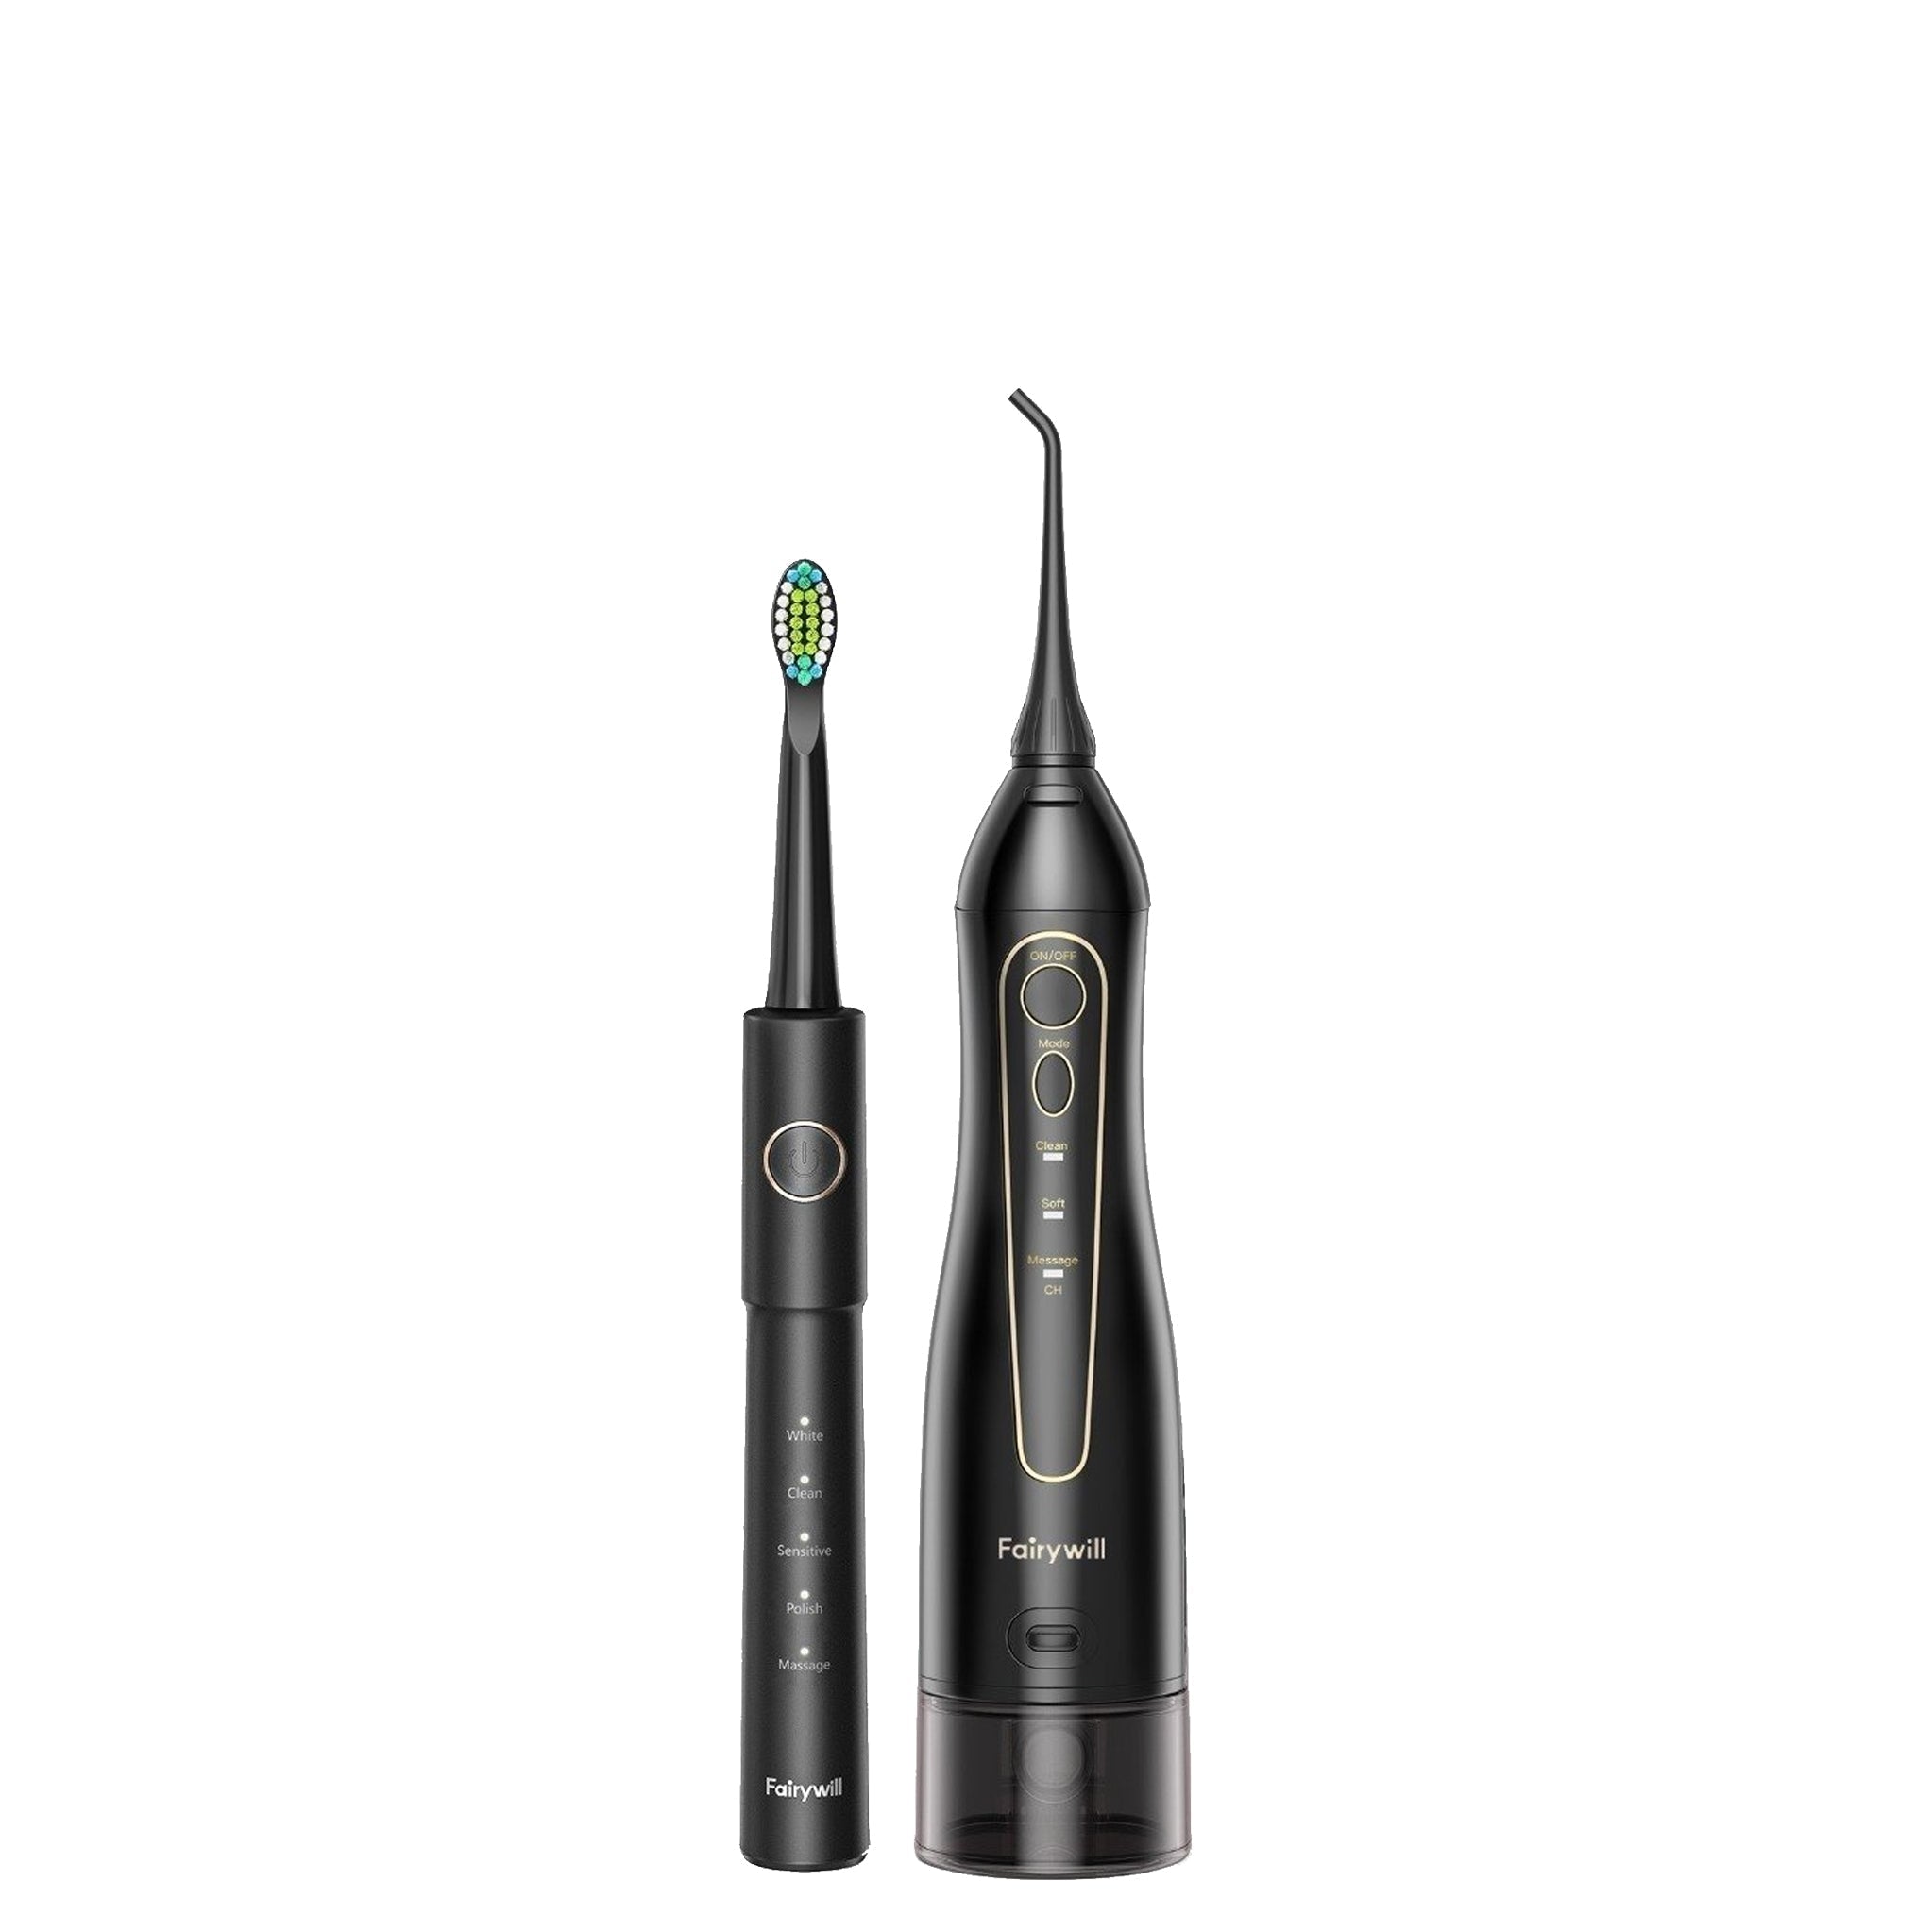 Fairywill Oral Care Combo Sonic Electric Toothbrush & Oral Irrigator - Black